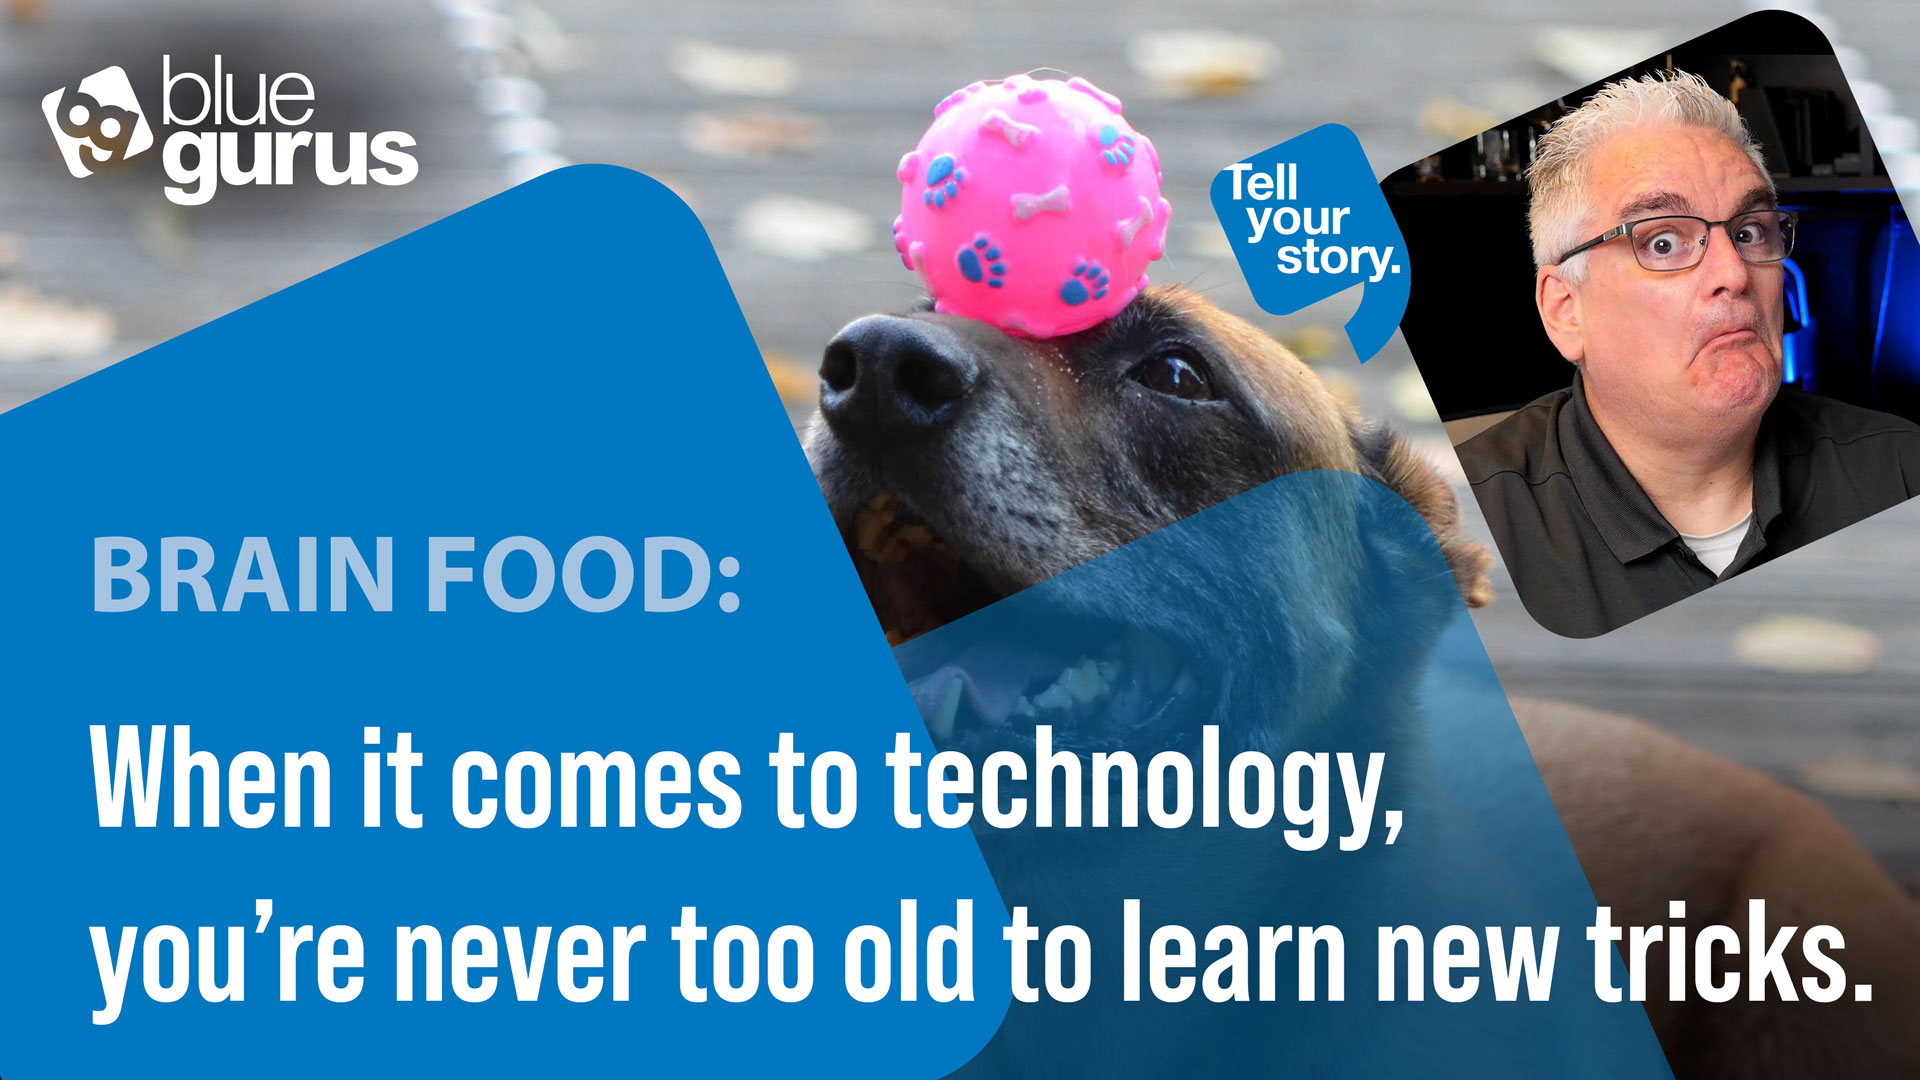 When it comes to technology, you’re never too old to learn new tricks.